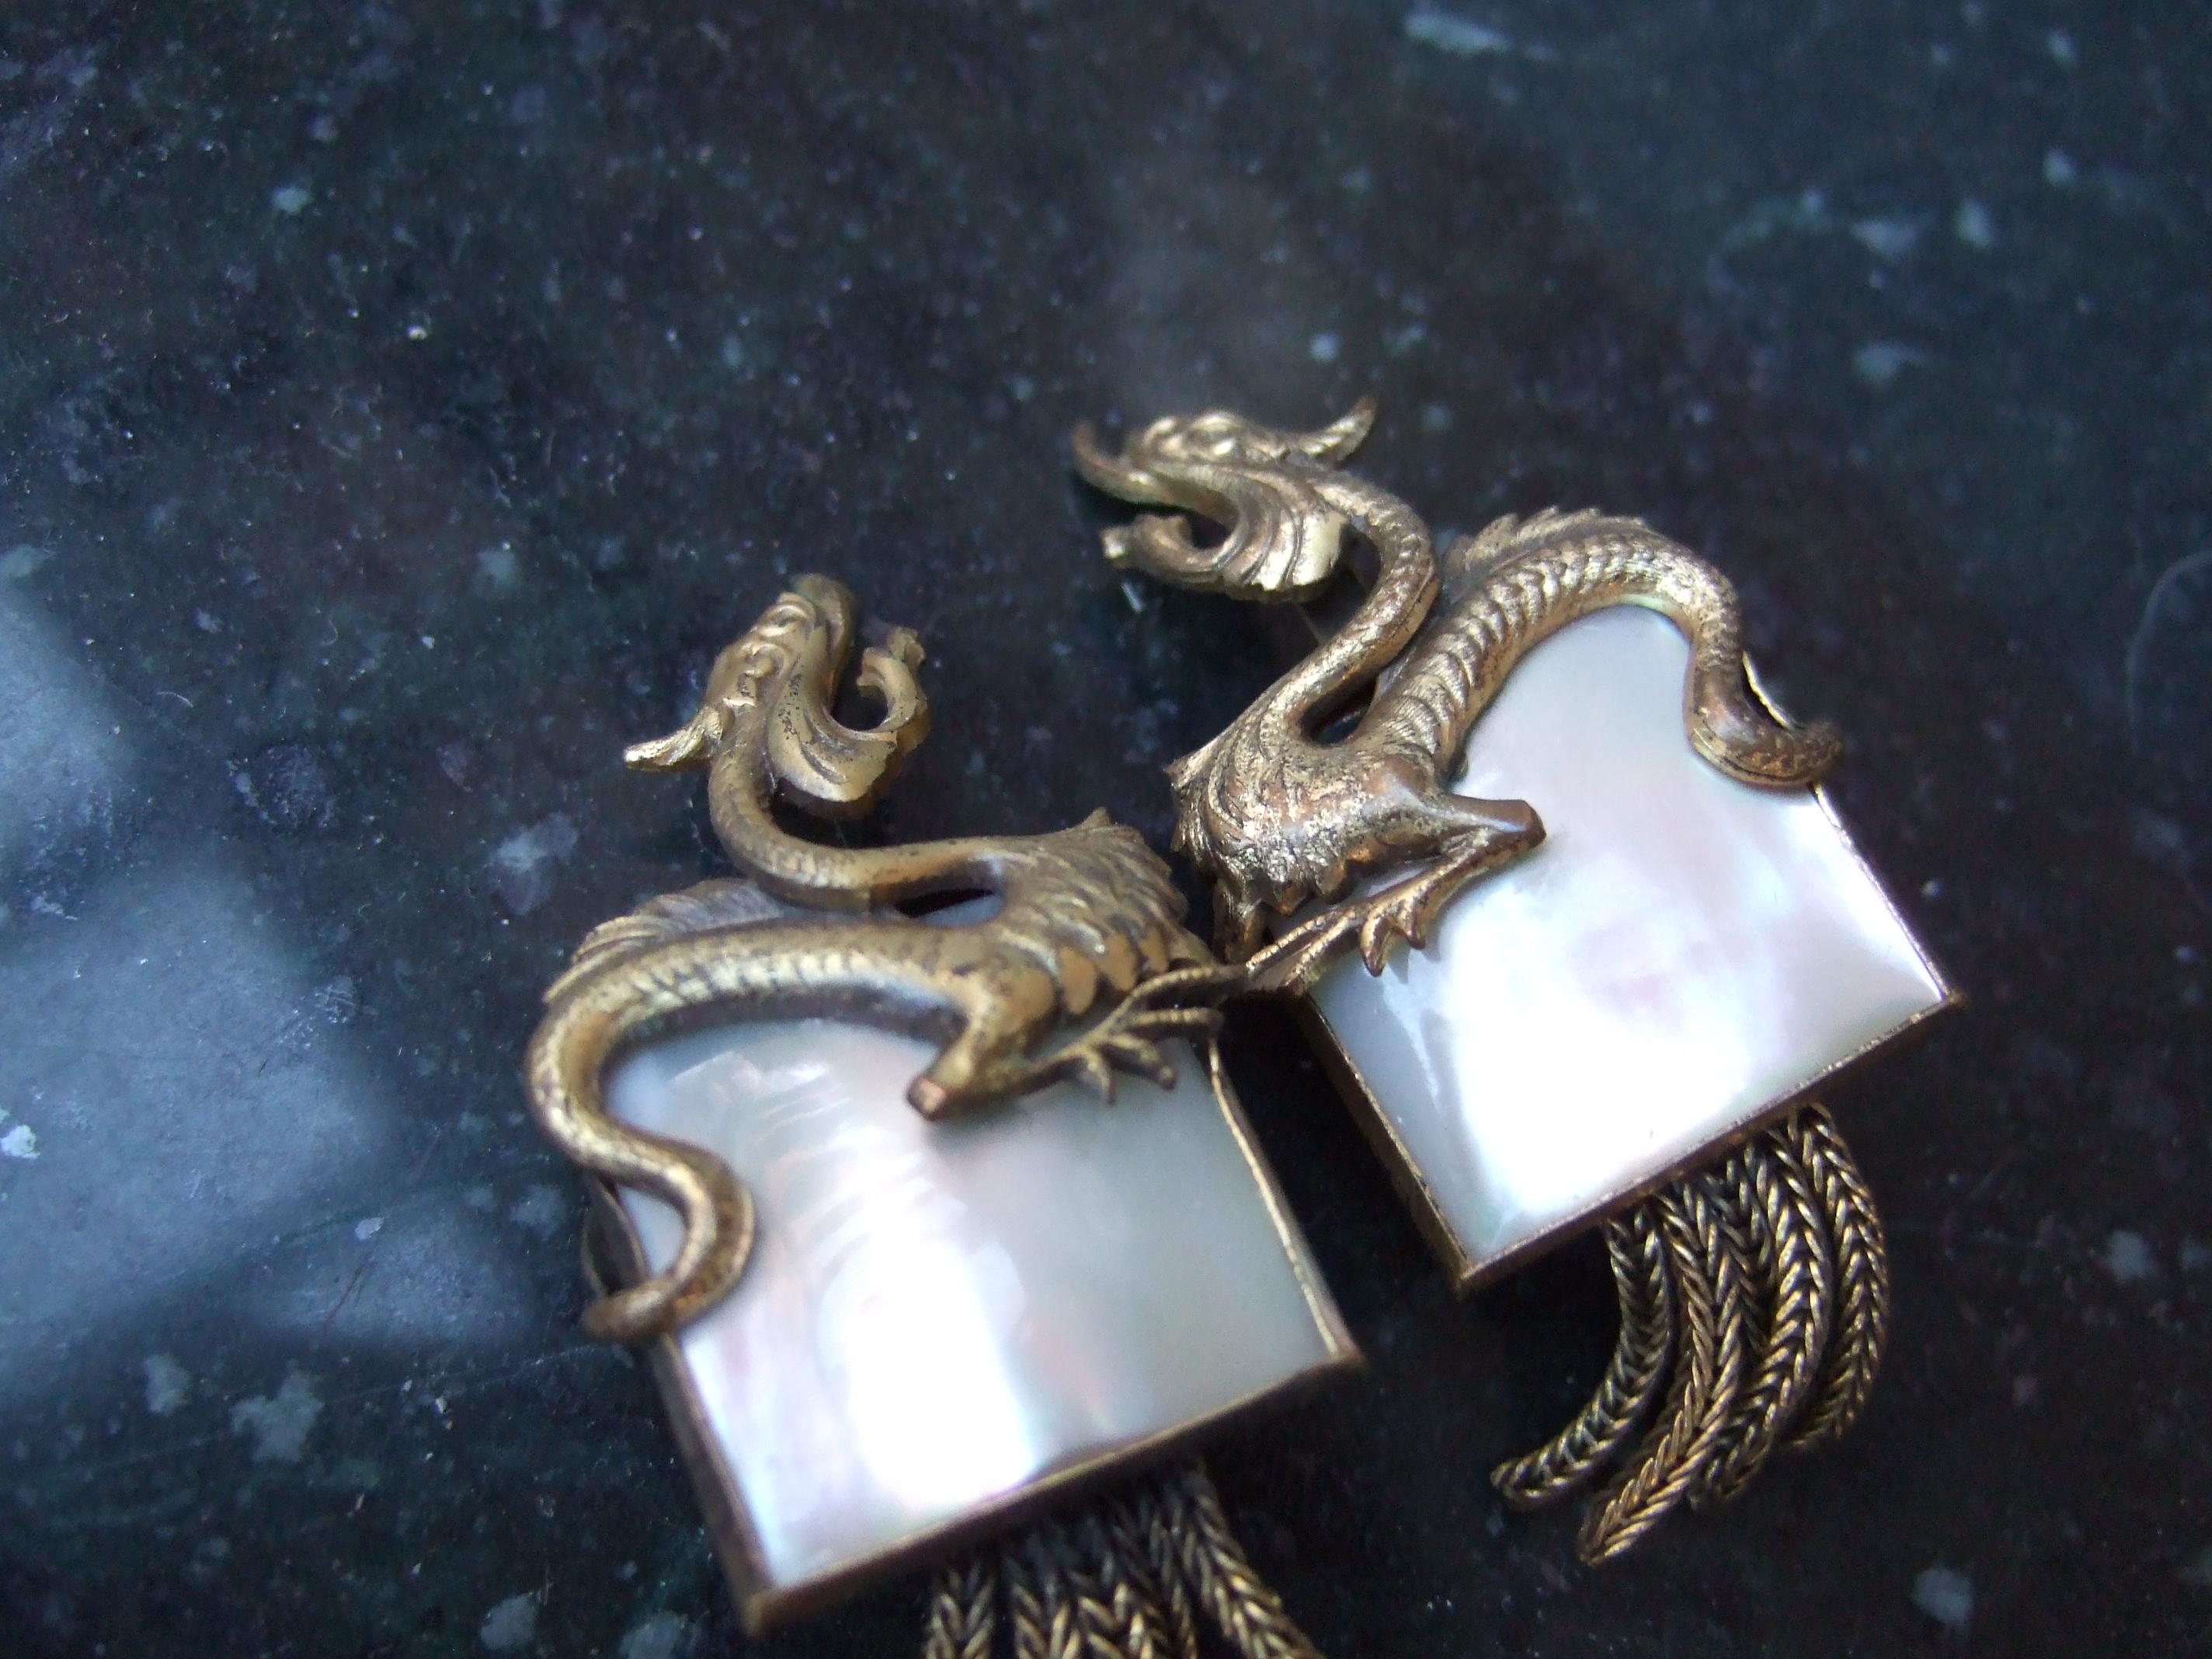 Avant-garde brass mother of pearl dragon design clip-on earrings c 1960
The unique mid-century clip-on earrings are designed with a pair
of stylized mythical dragons in brass tone metal 

The center of the earrings are embellished with a square